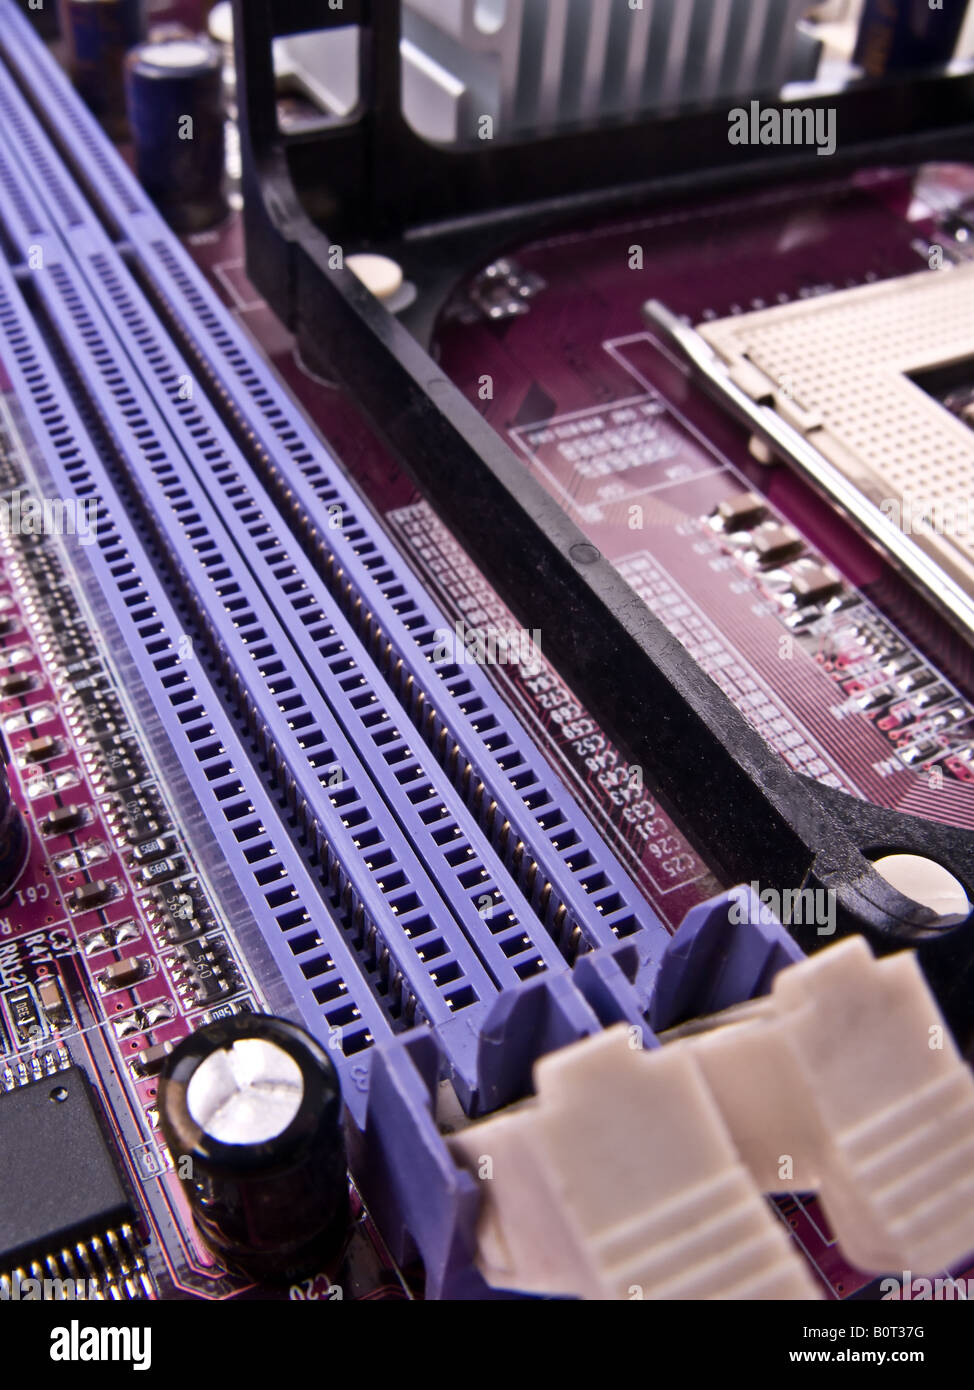 Macro of the Ram memory slots in a pc motherboard Stock Photo